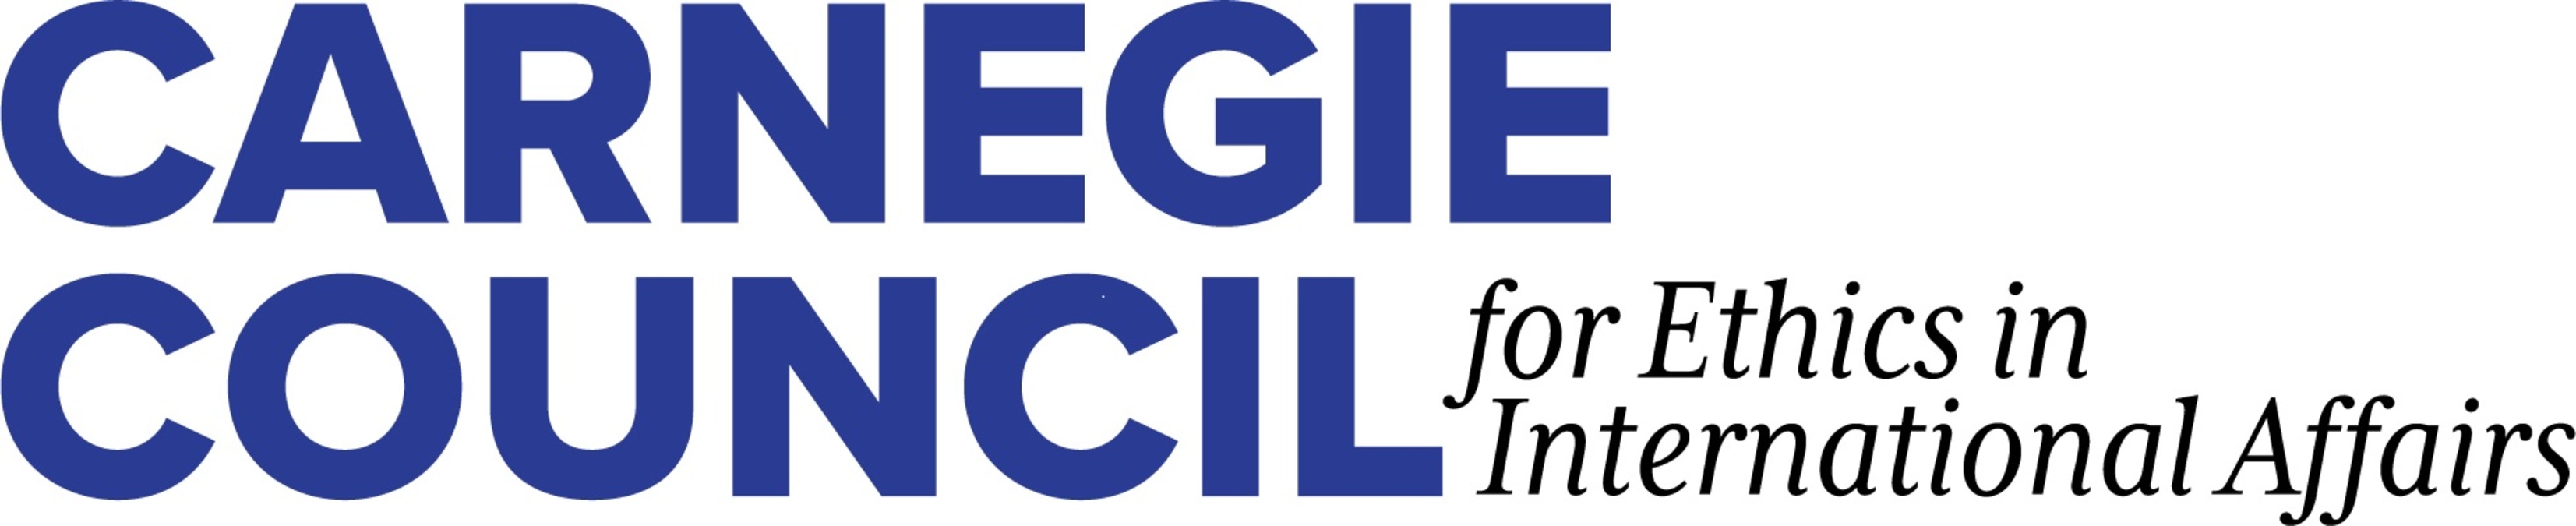 Carnegie Council For Ethics In International Affairs Announces 2021 Impact Initiatives